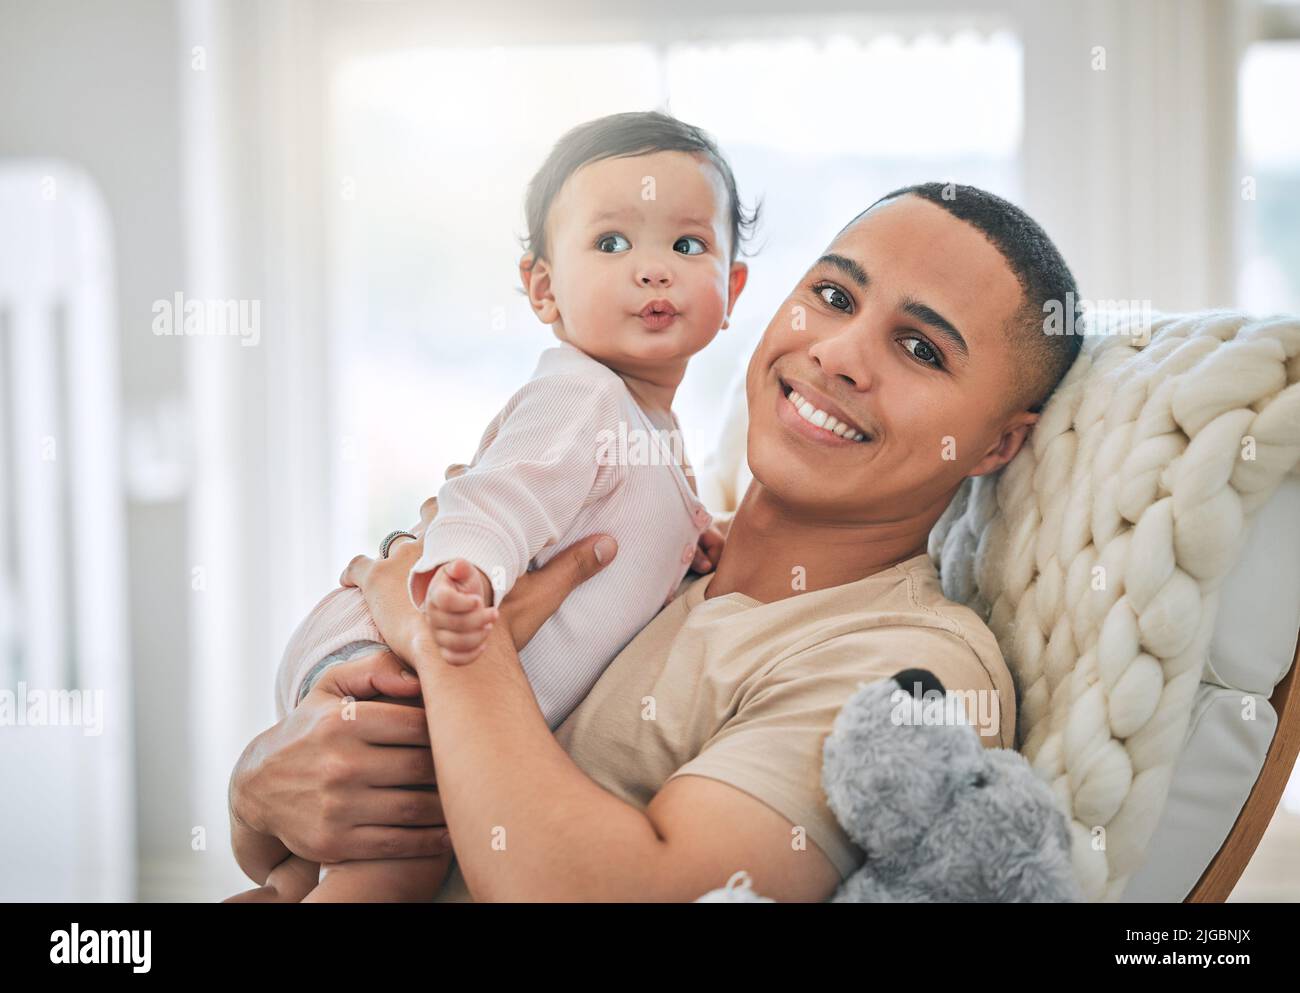 Shes my everything. a handsome young man and his newborn baby at home. Stock Photo